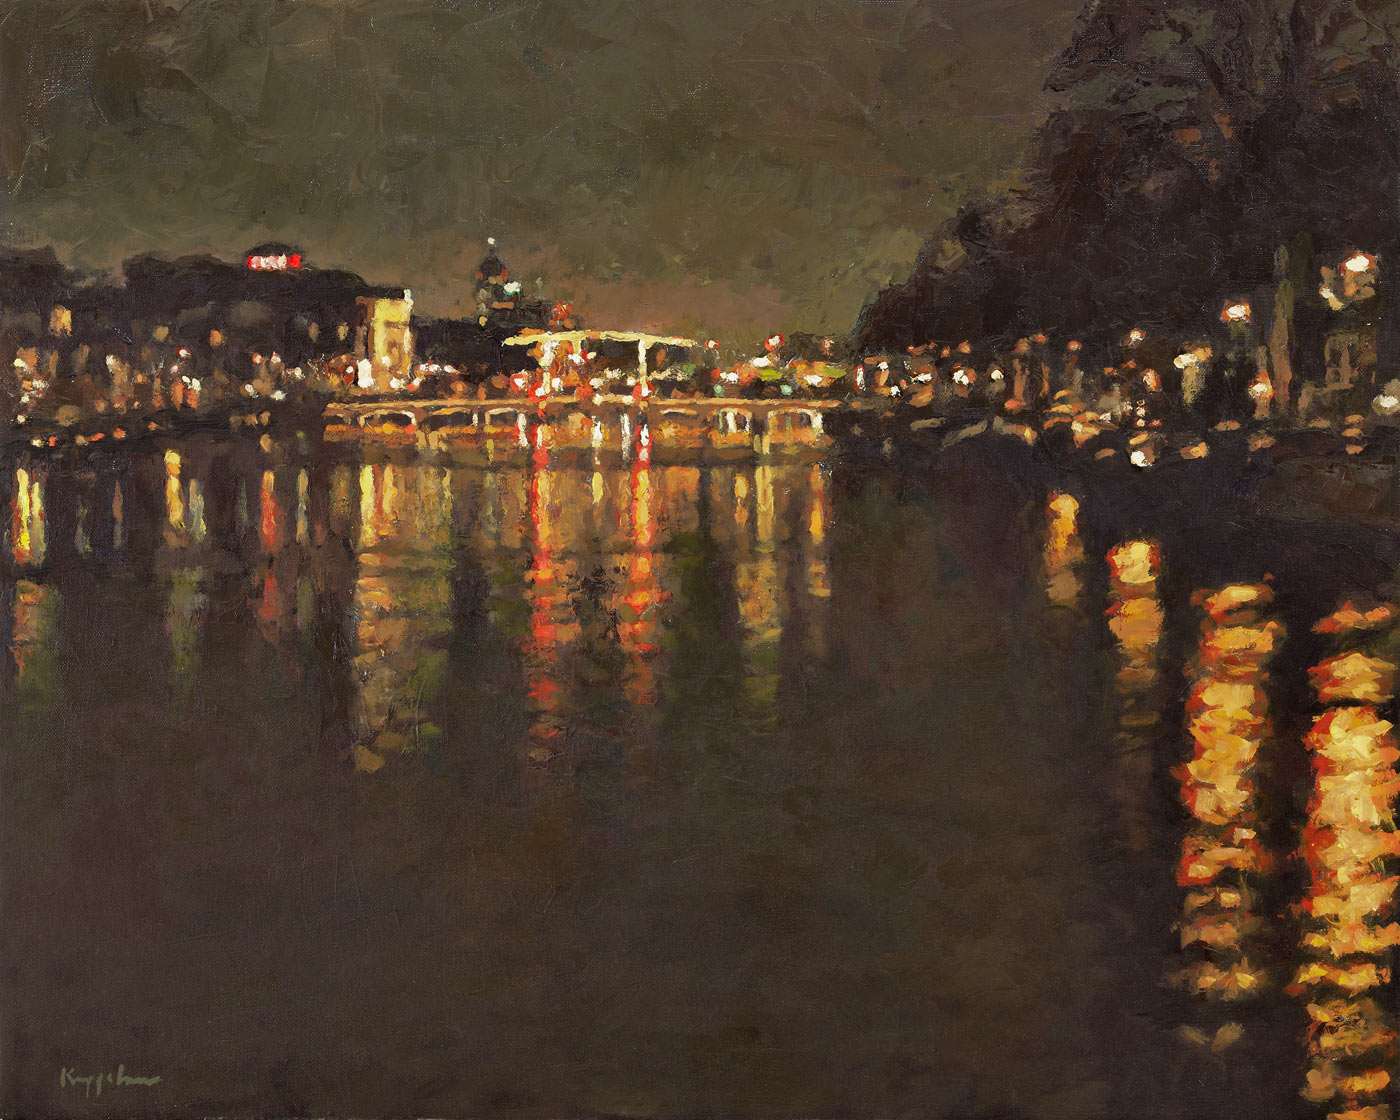 cityscape: 'River Amstel By Night' oil on canvas by Dutch painter Frans Koppelaar.